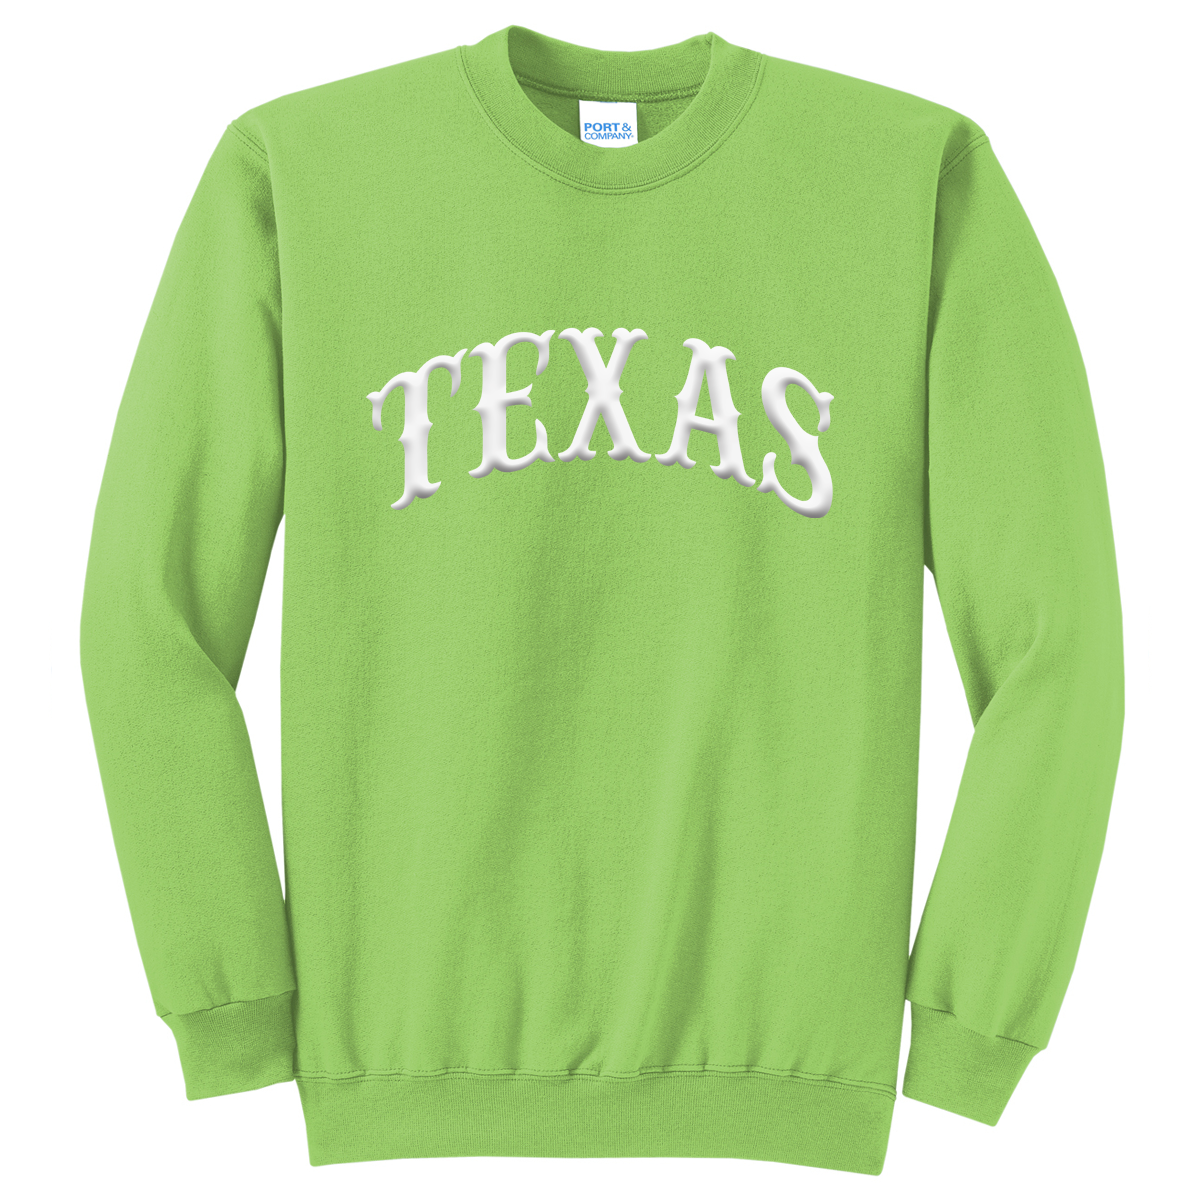 TEXAS PUFF SCREENPRINT ON A GILDAN CREWNECK FLEECE SWEATER WESTERN STYLE LIGHT GREEN COLOR WITH A WHITE INK ARCH TEXAS GRAPHIC